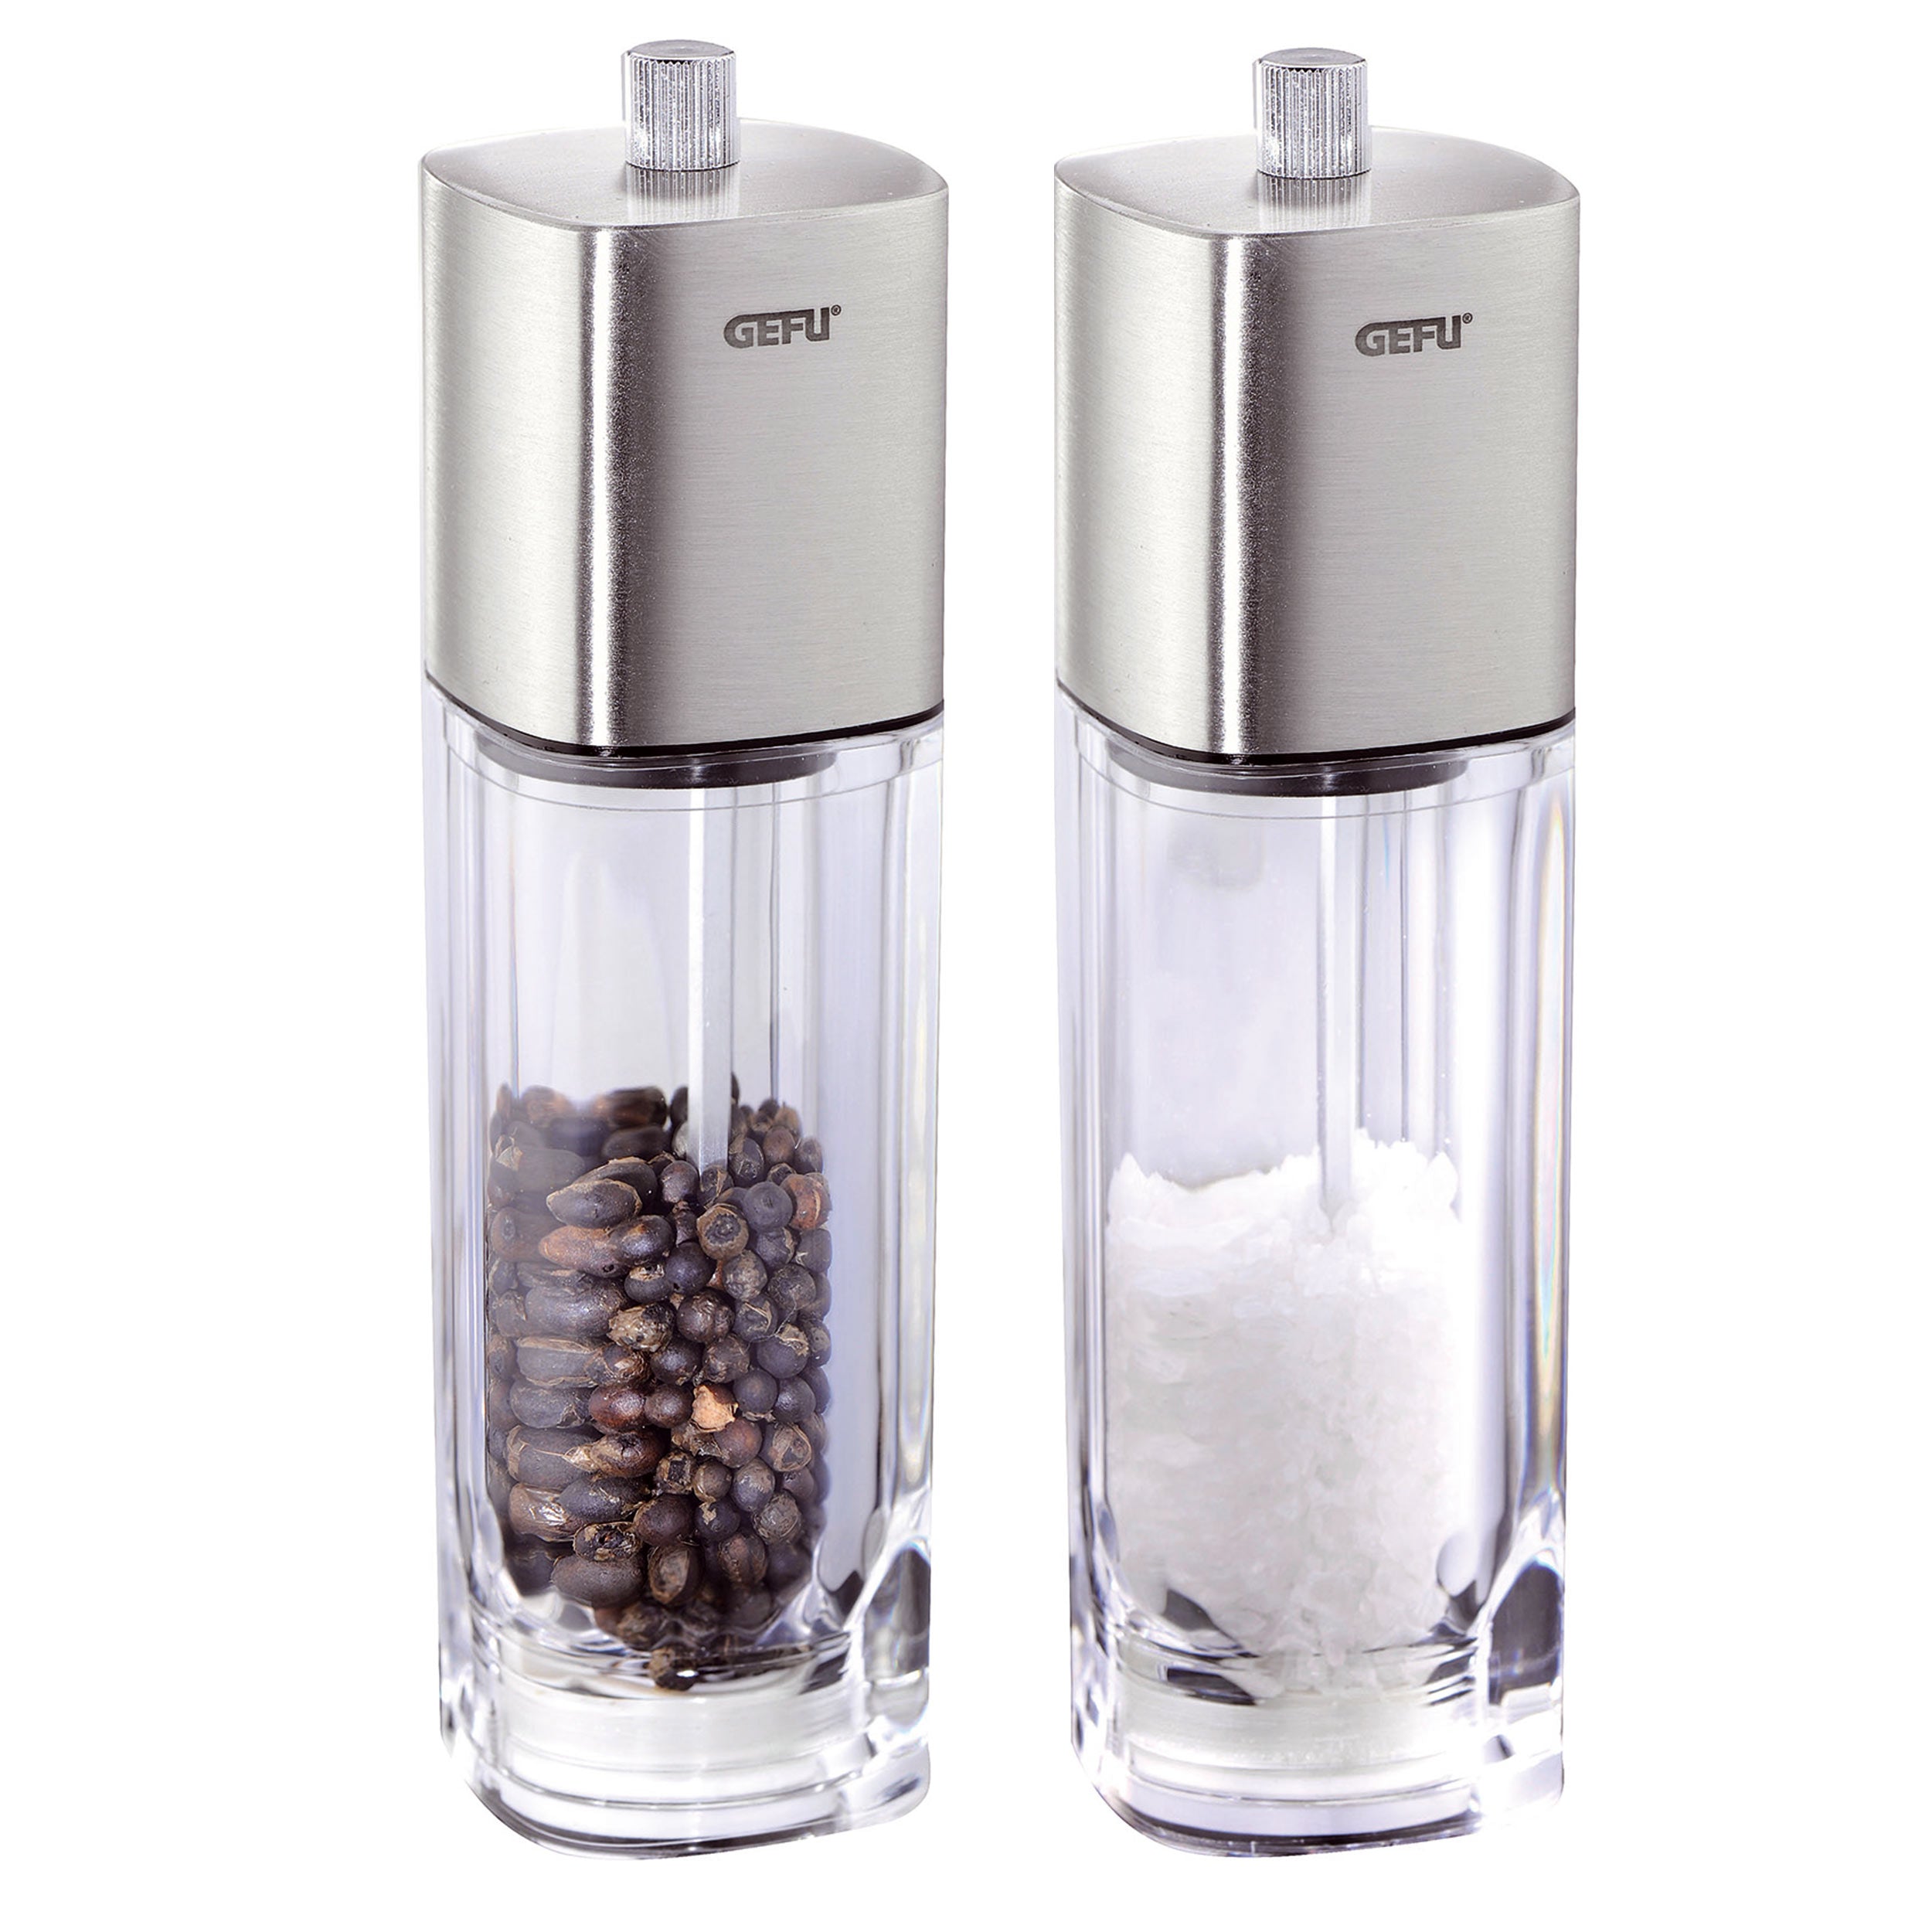 GEFU Pepper And Salt Mill Dueto, 2-Piece Set - Whole and All